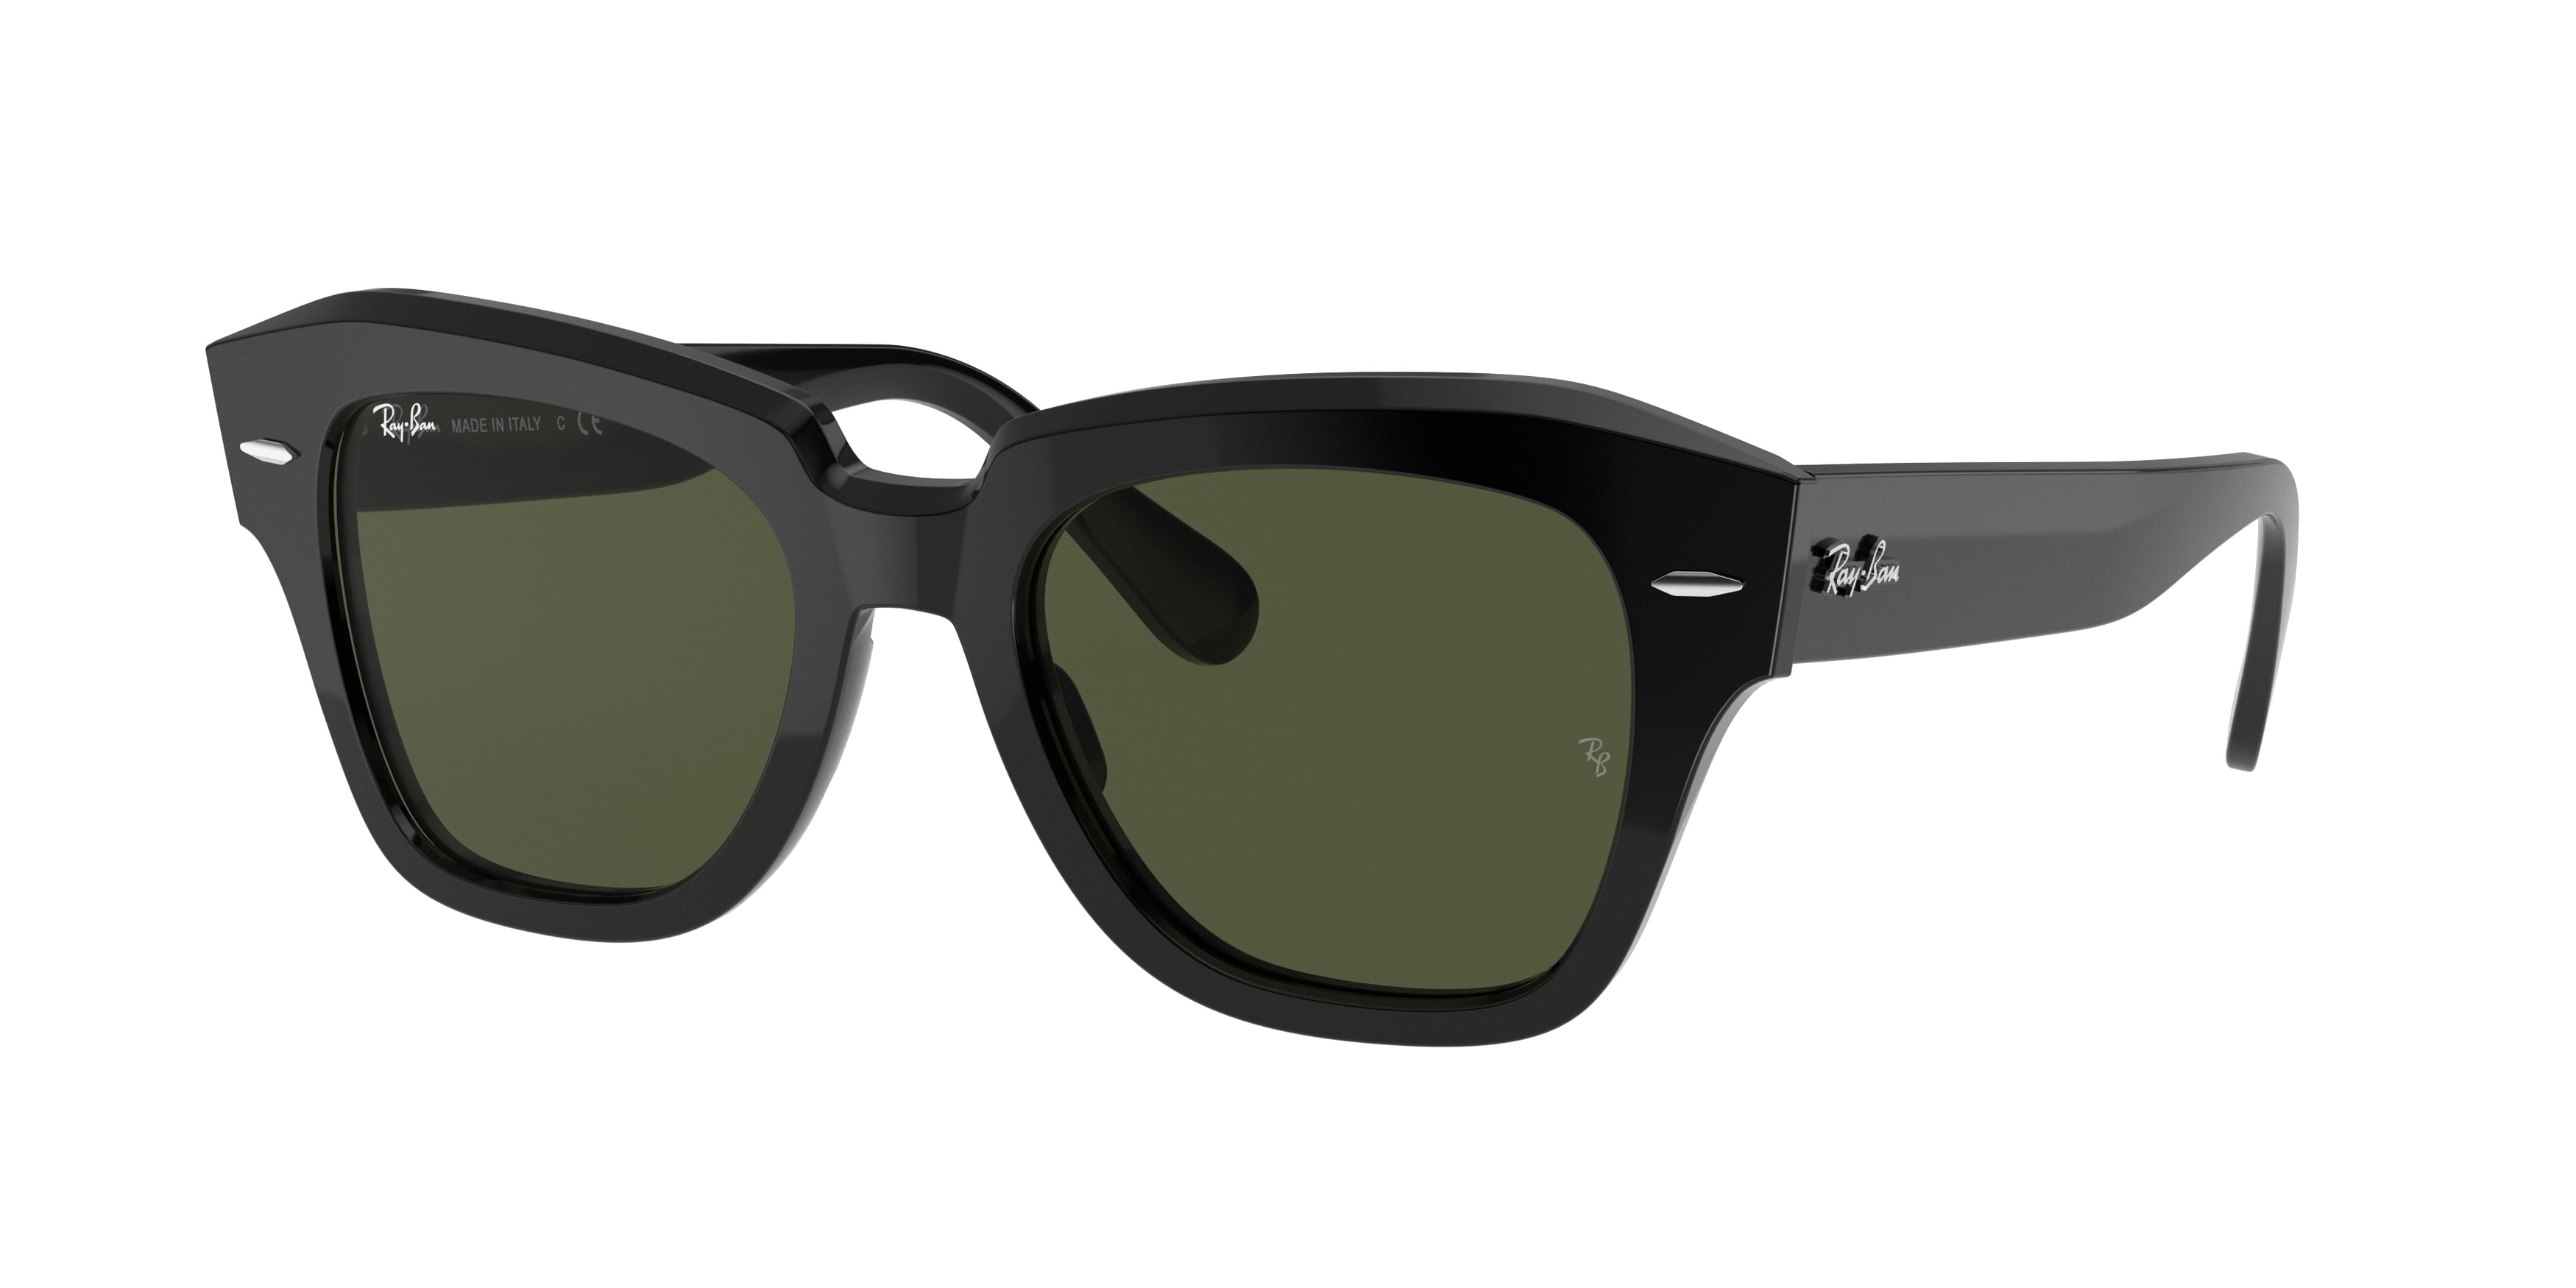 Ray-Ban STATE STREET RB2186 Square Sunglasses  901/31-Black 52-145-20 - Color Map Black